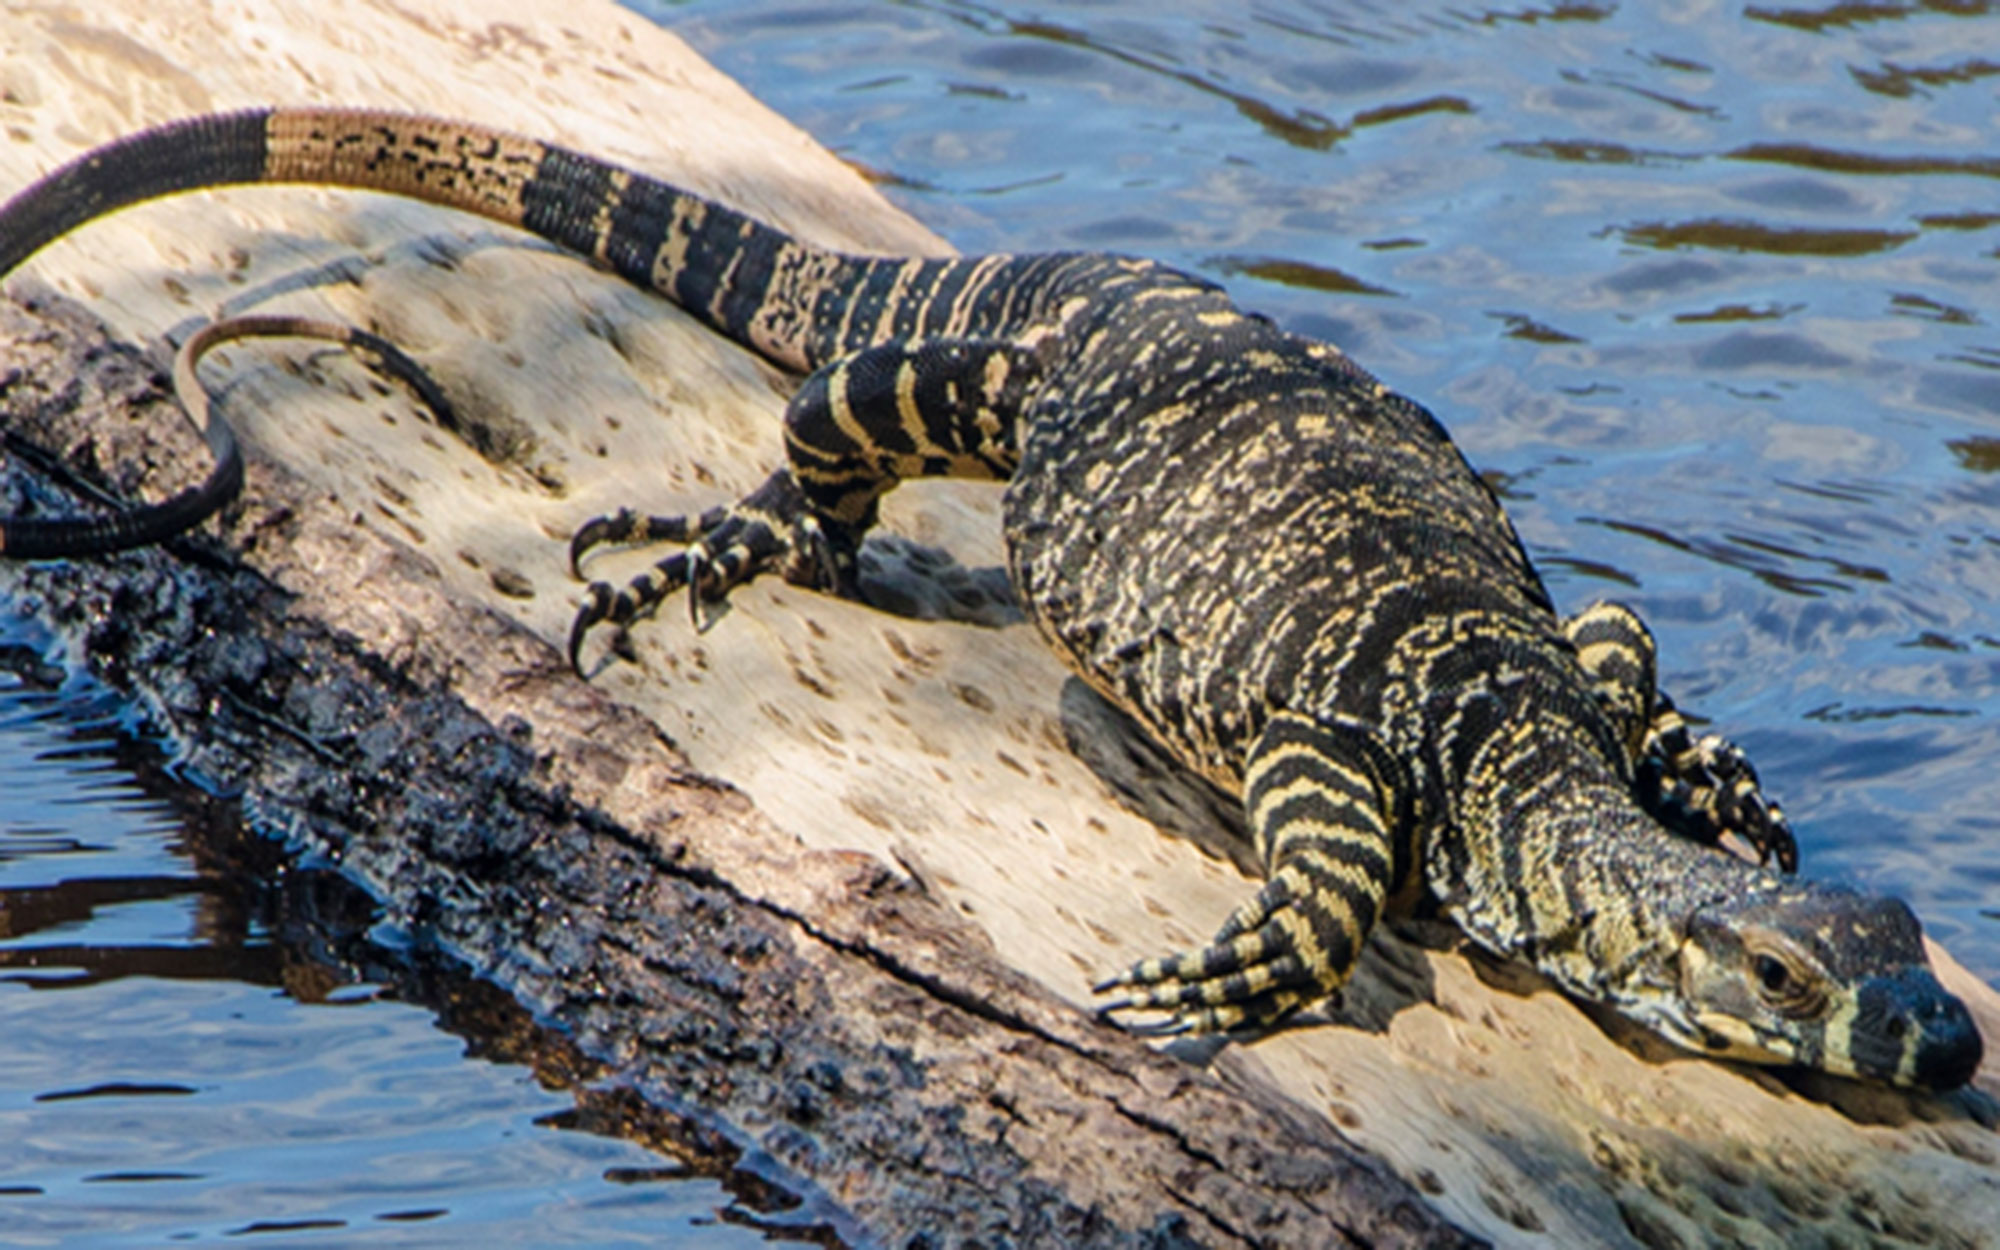 Lace Monitor lizard on a log in the water 